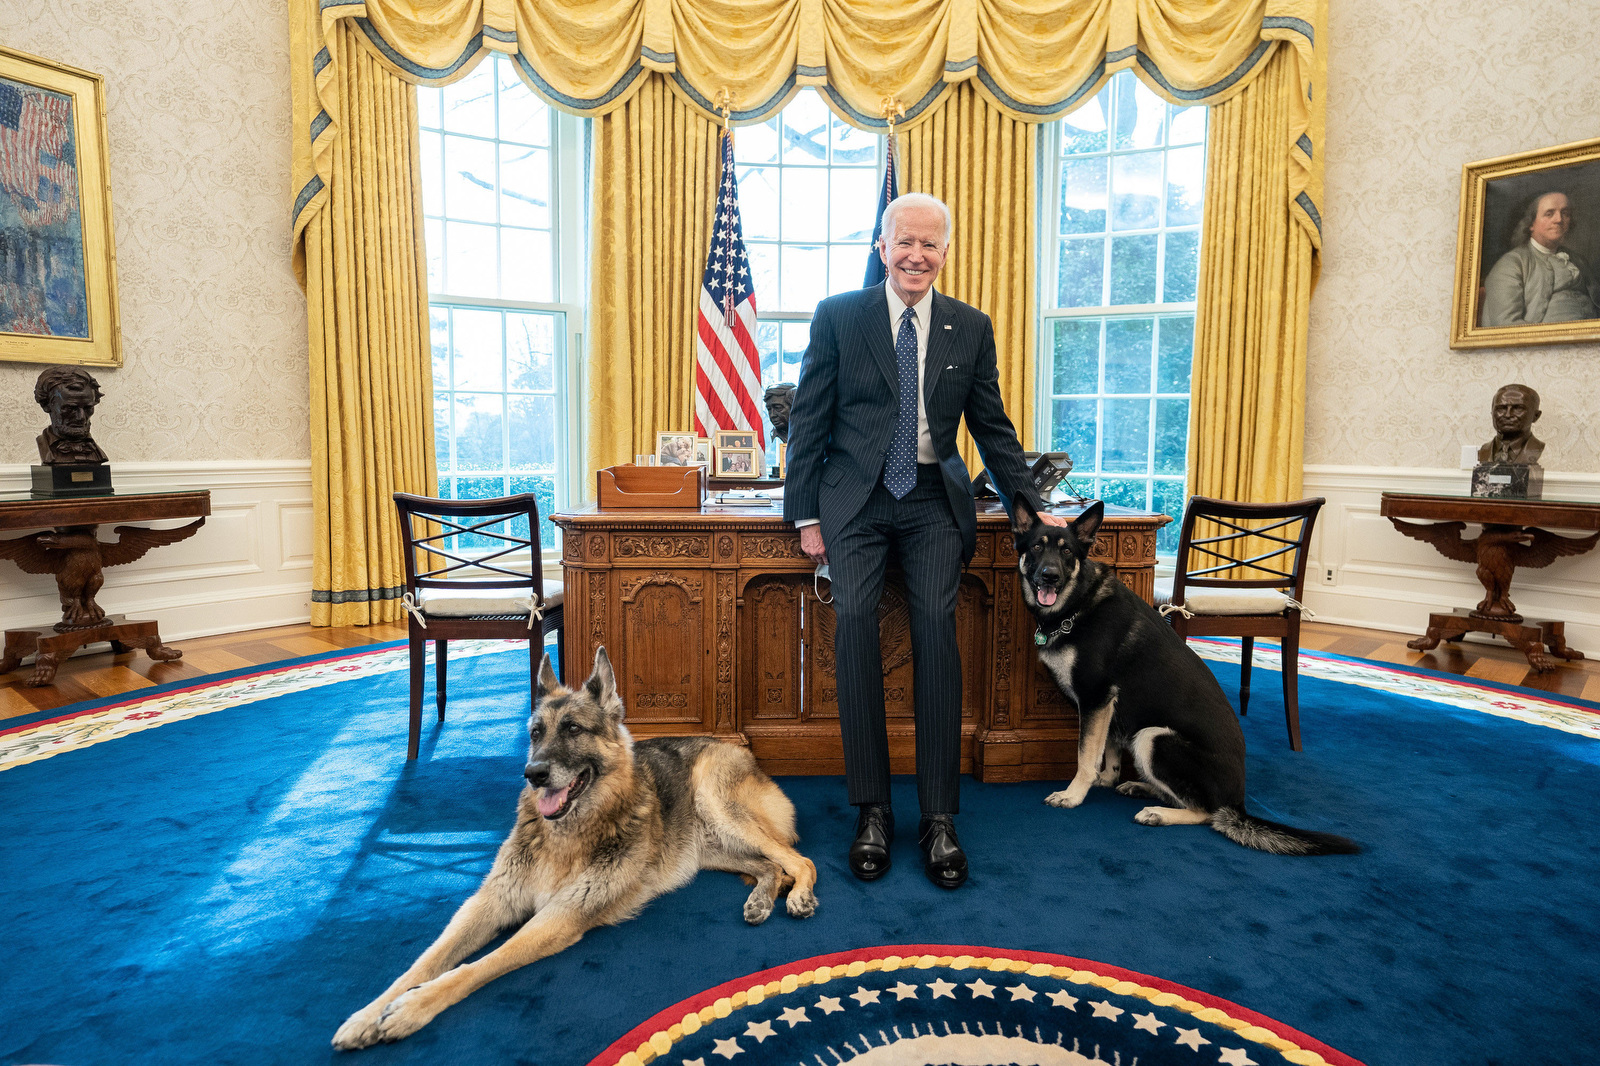 PHOTO: President Joe Biden is pictured with the Biden family dogs Champ and Major on Feb. 9, 2021 in the Oval Office of the White House in Washington, D.C.